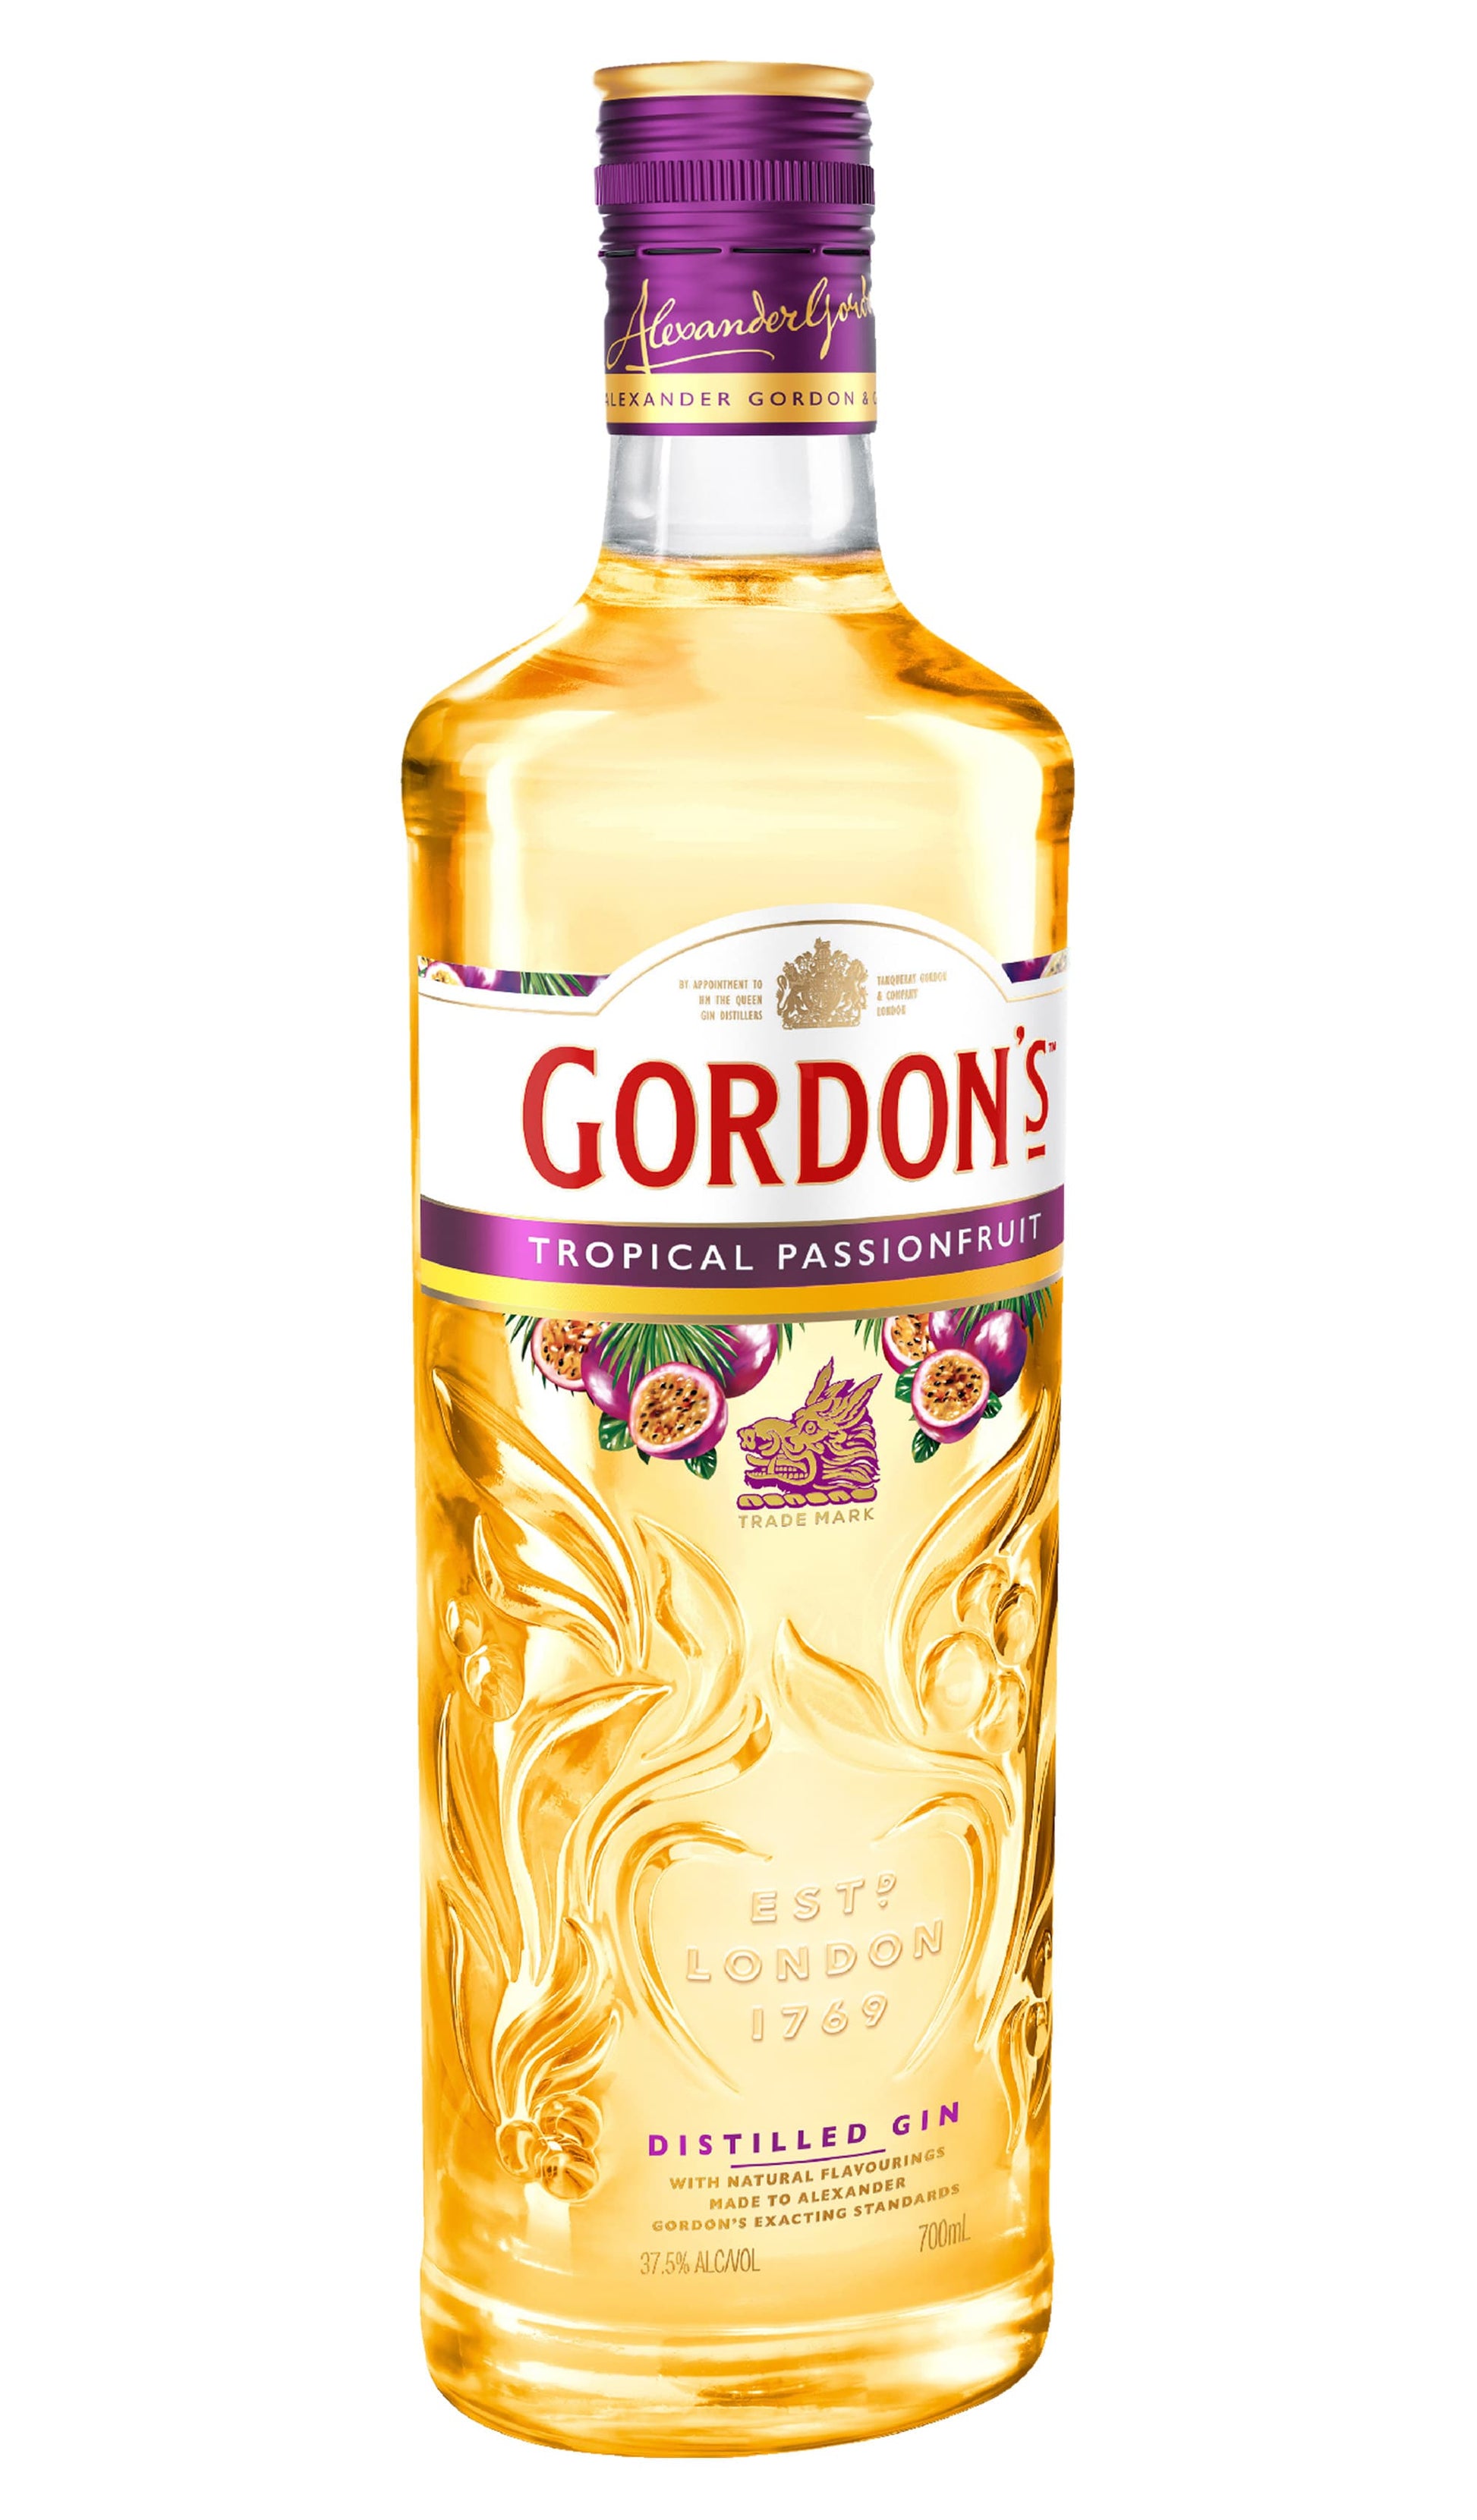 Find out more, explore the range, or buy Gordon's Tropical Passionfruit Gin 700mL available online at Wine Sellers Direct - Australia's independent liquor specialists.